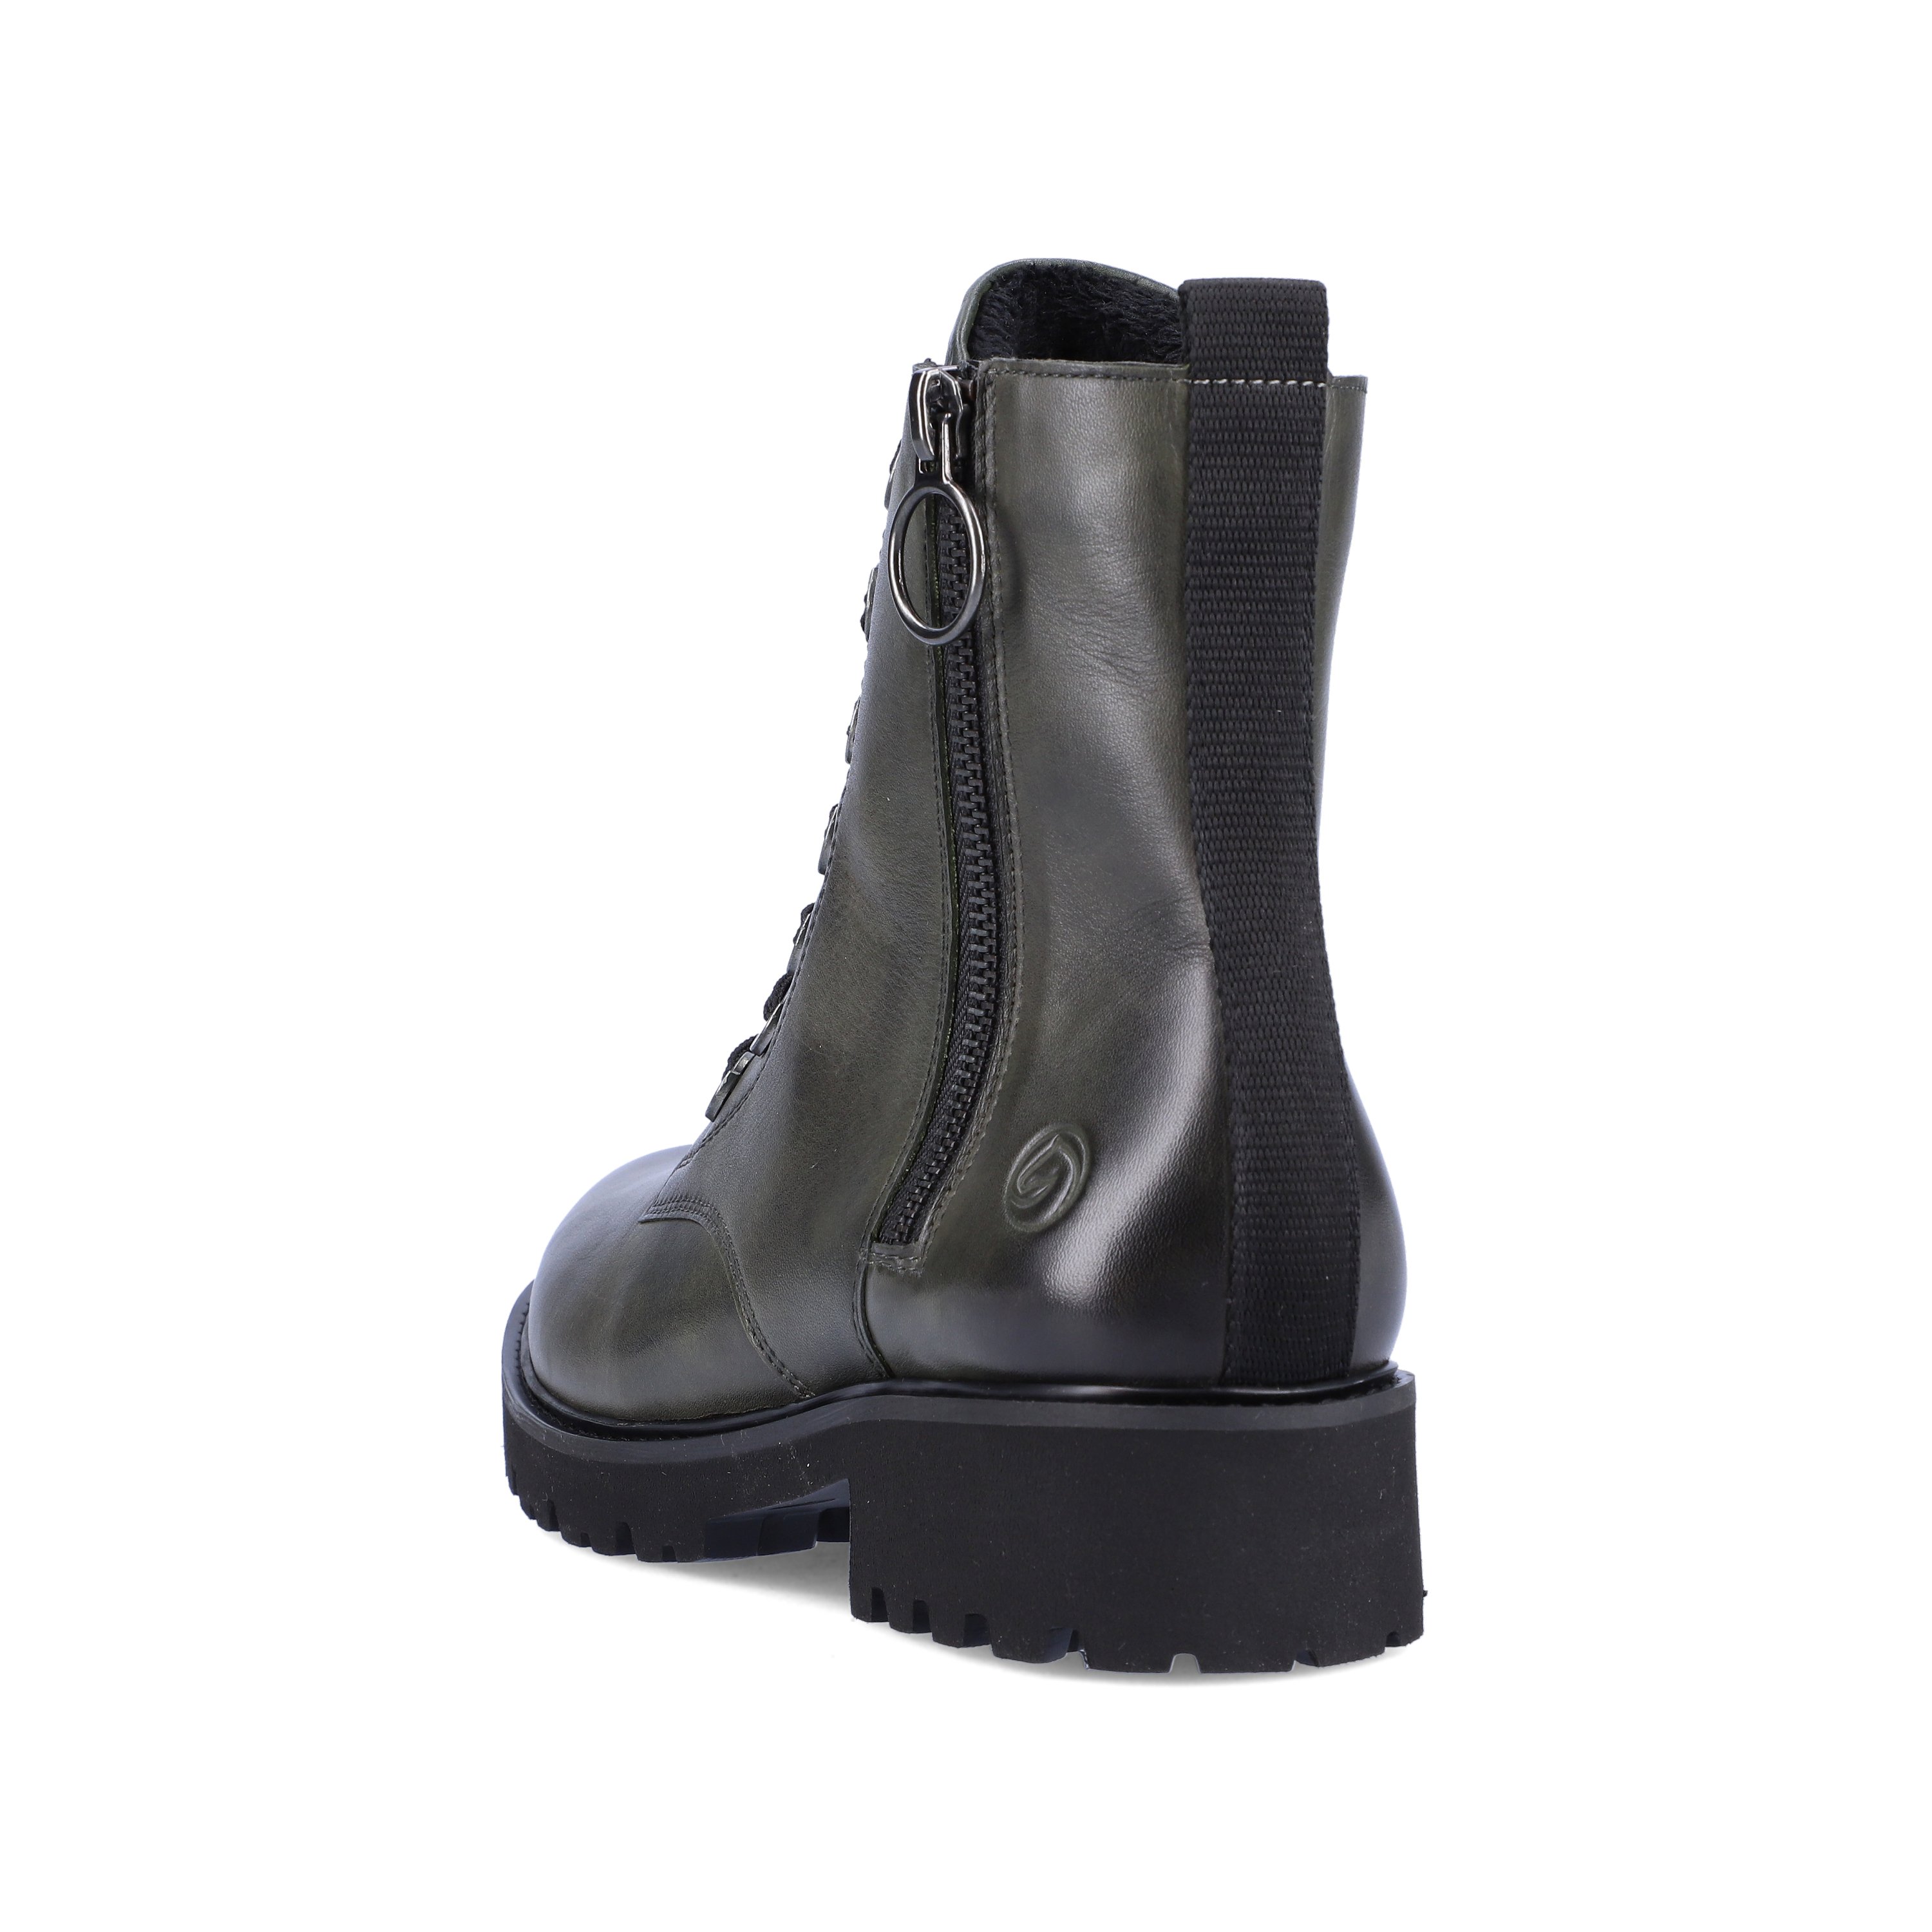 Green-grey remonte women´s biker boots D8671-52 with especially light sole. Shoe from the back